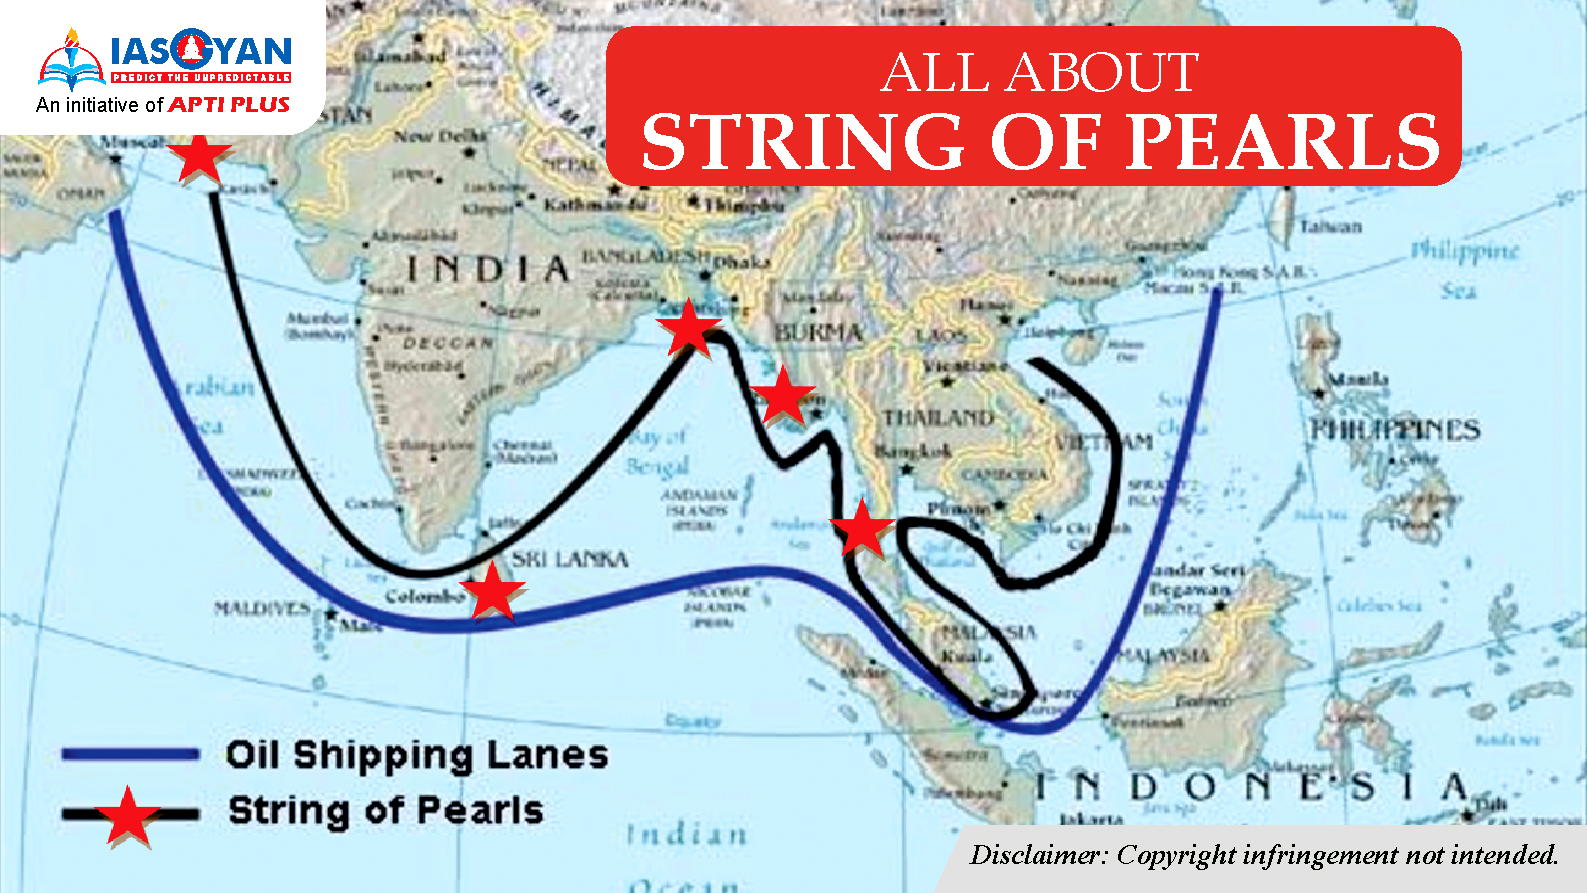 ALL ABOUT STRING OF PEARLS